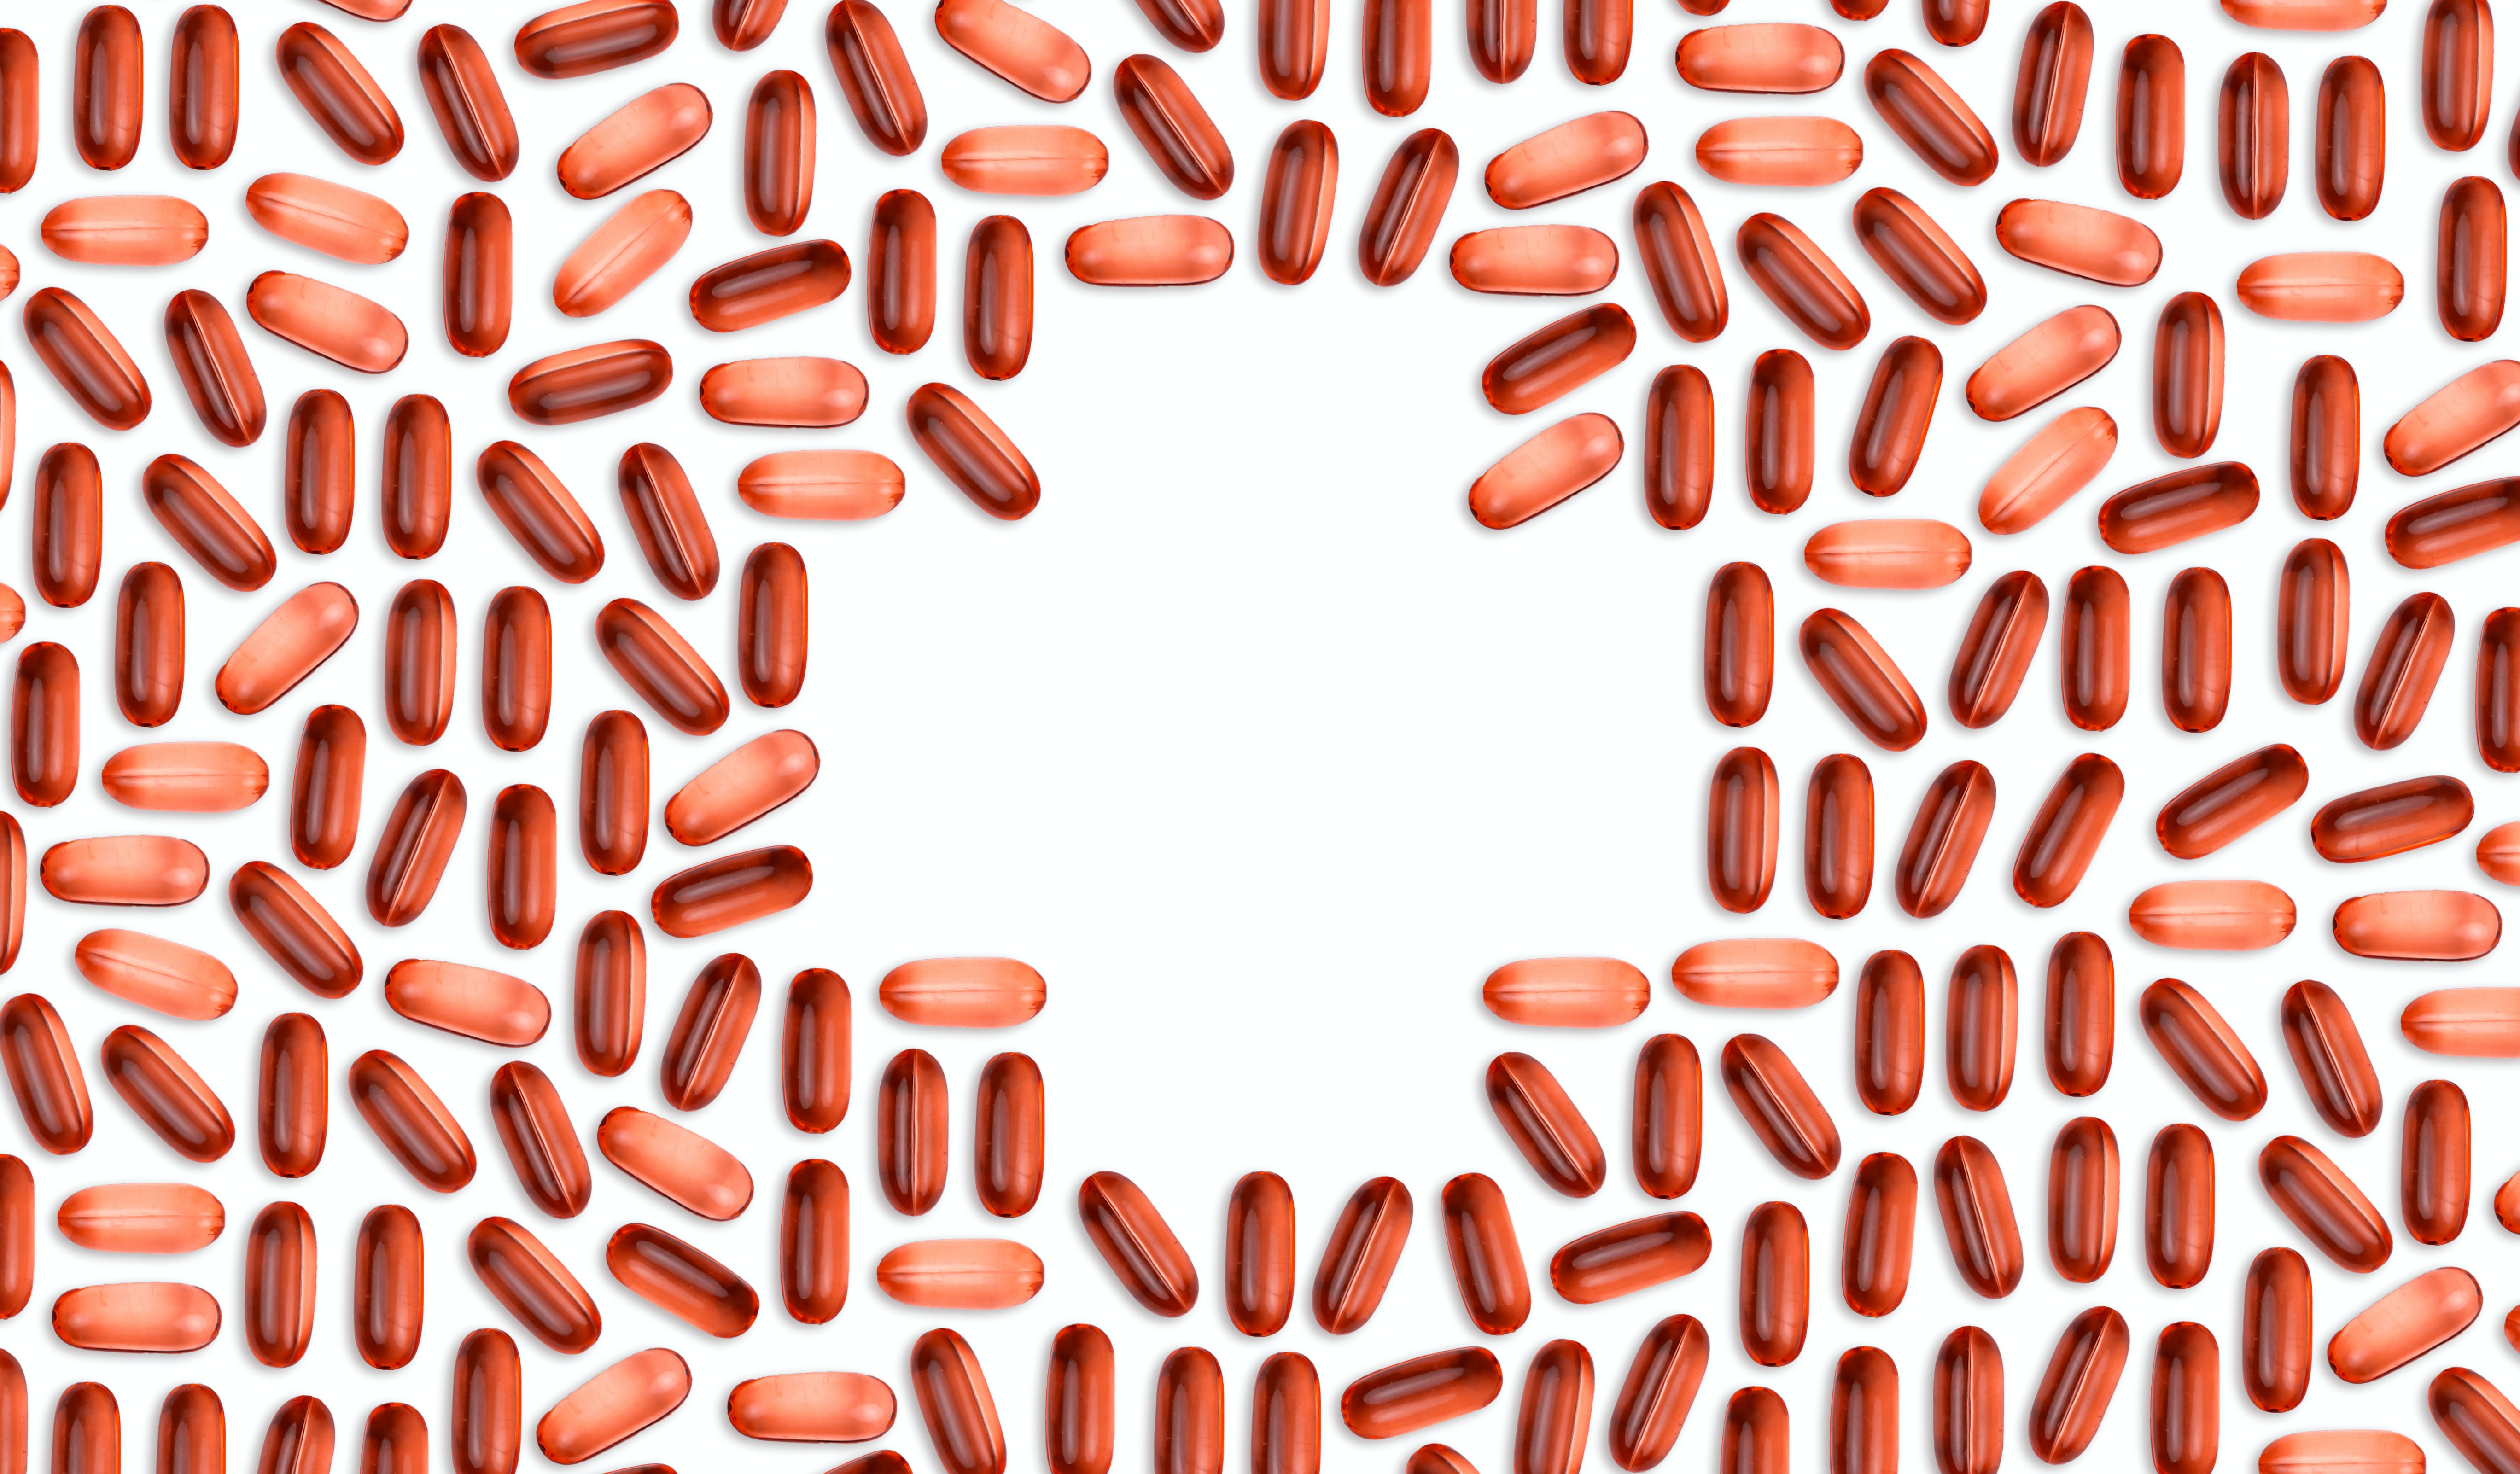 Red vitamins tablets laid out on a table, creating an abstract image